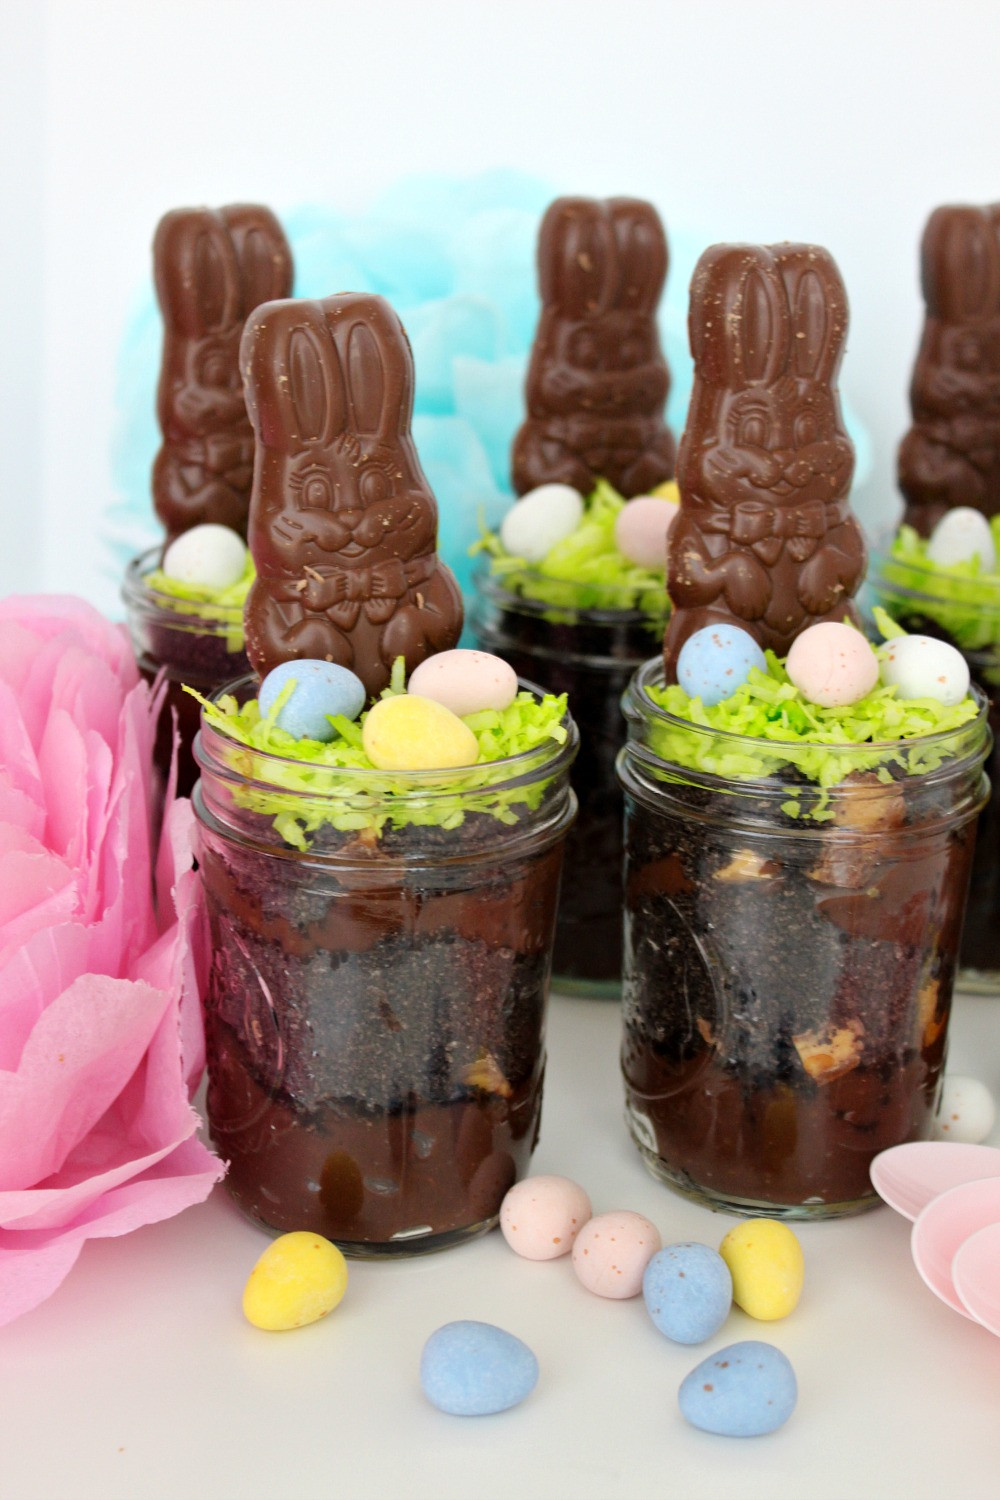 Easter Cake Easter Desserts
 An Easy & Delicious Easter Dessert Using Classic and New